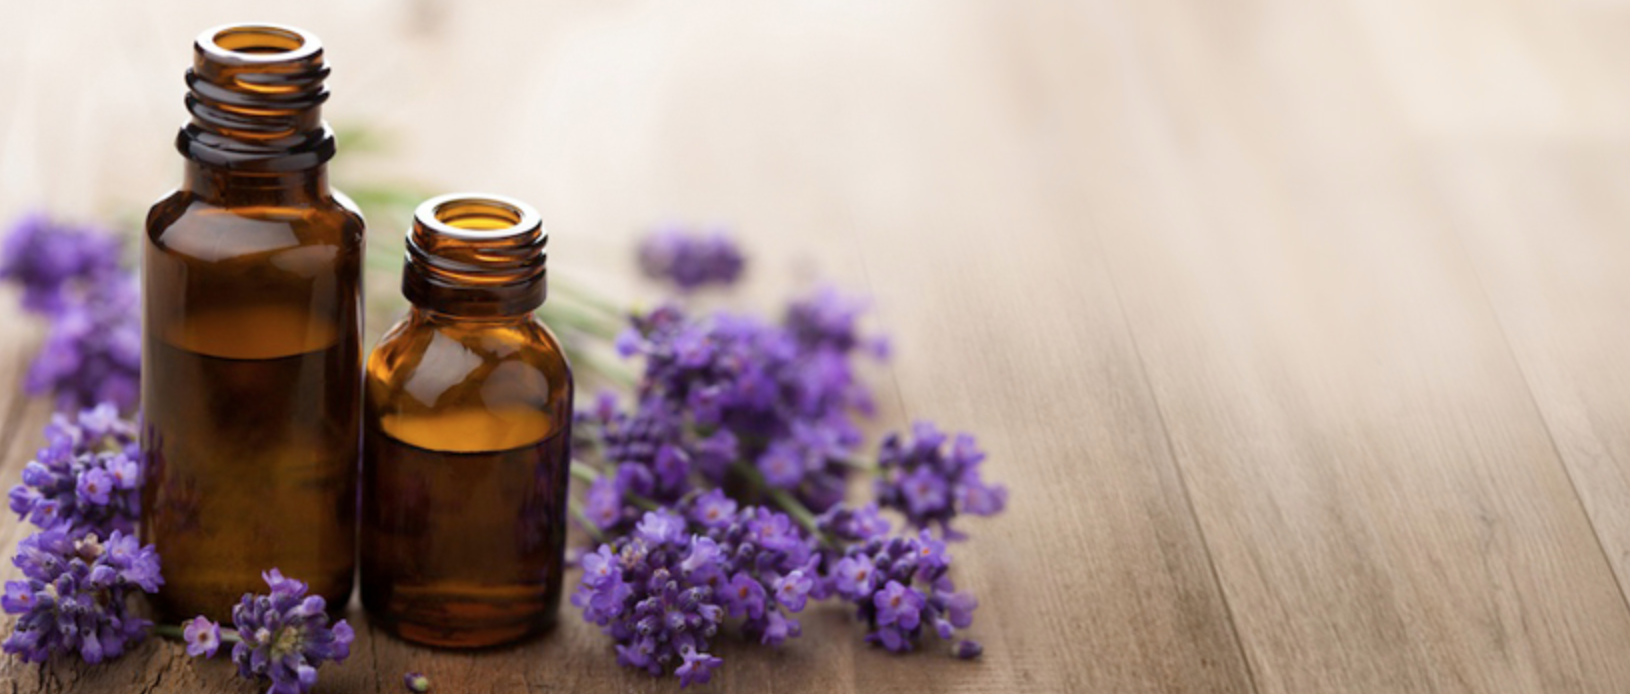 15 Best Essential Oils and Their Health Benefits | Wake Up World